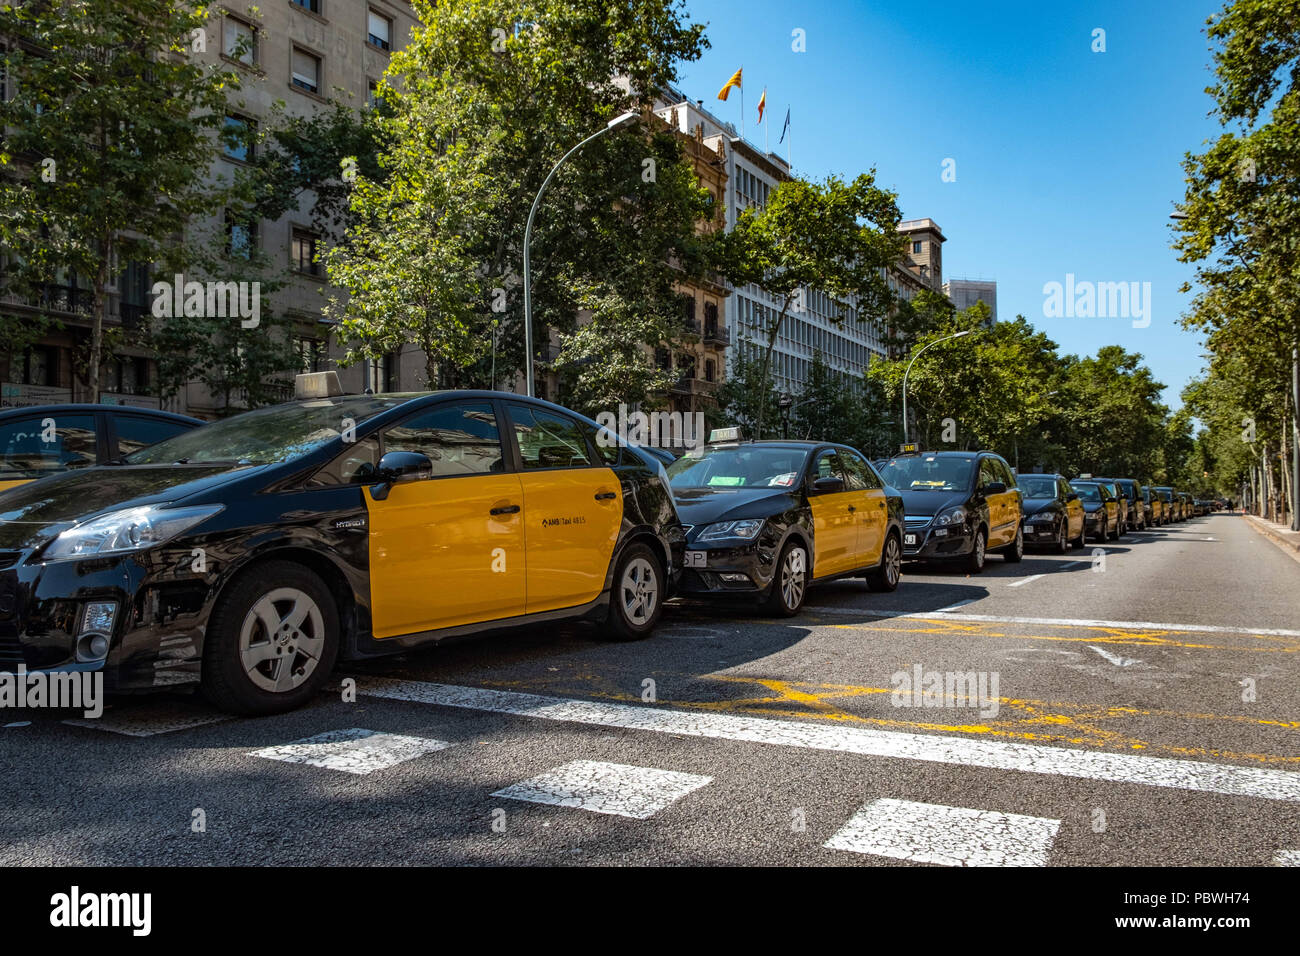 Barcelona, Catalonia, Spain. 30th July, 2018. A long line of parked taxis seen on Gran VÃ-a de Barcelona. The taxi drivers strike enters its third day and extends through the main Spanish cities. The taxi sector is not willing to lose this battle in favor of the new Uber and Cabify platforms. Credit: Paco Freire/SOPA Images/ZUMA Wire/Alamy Live News Stock Photo